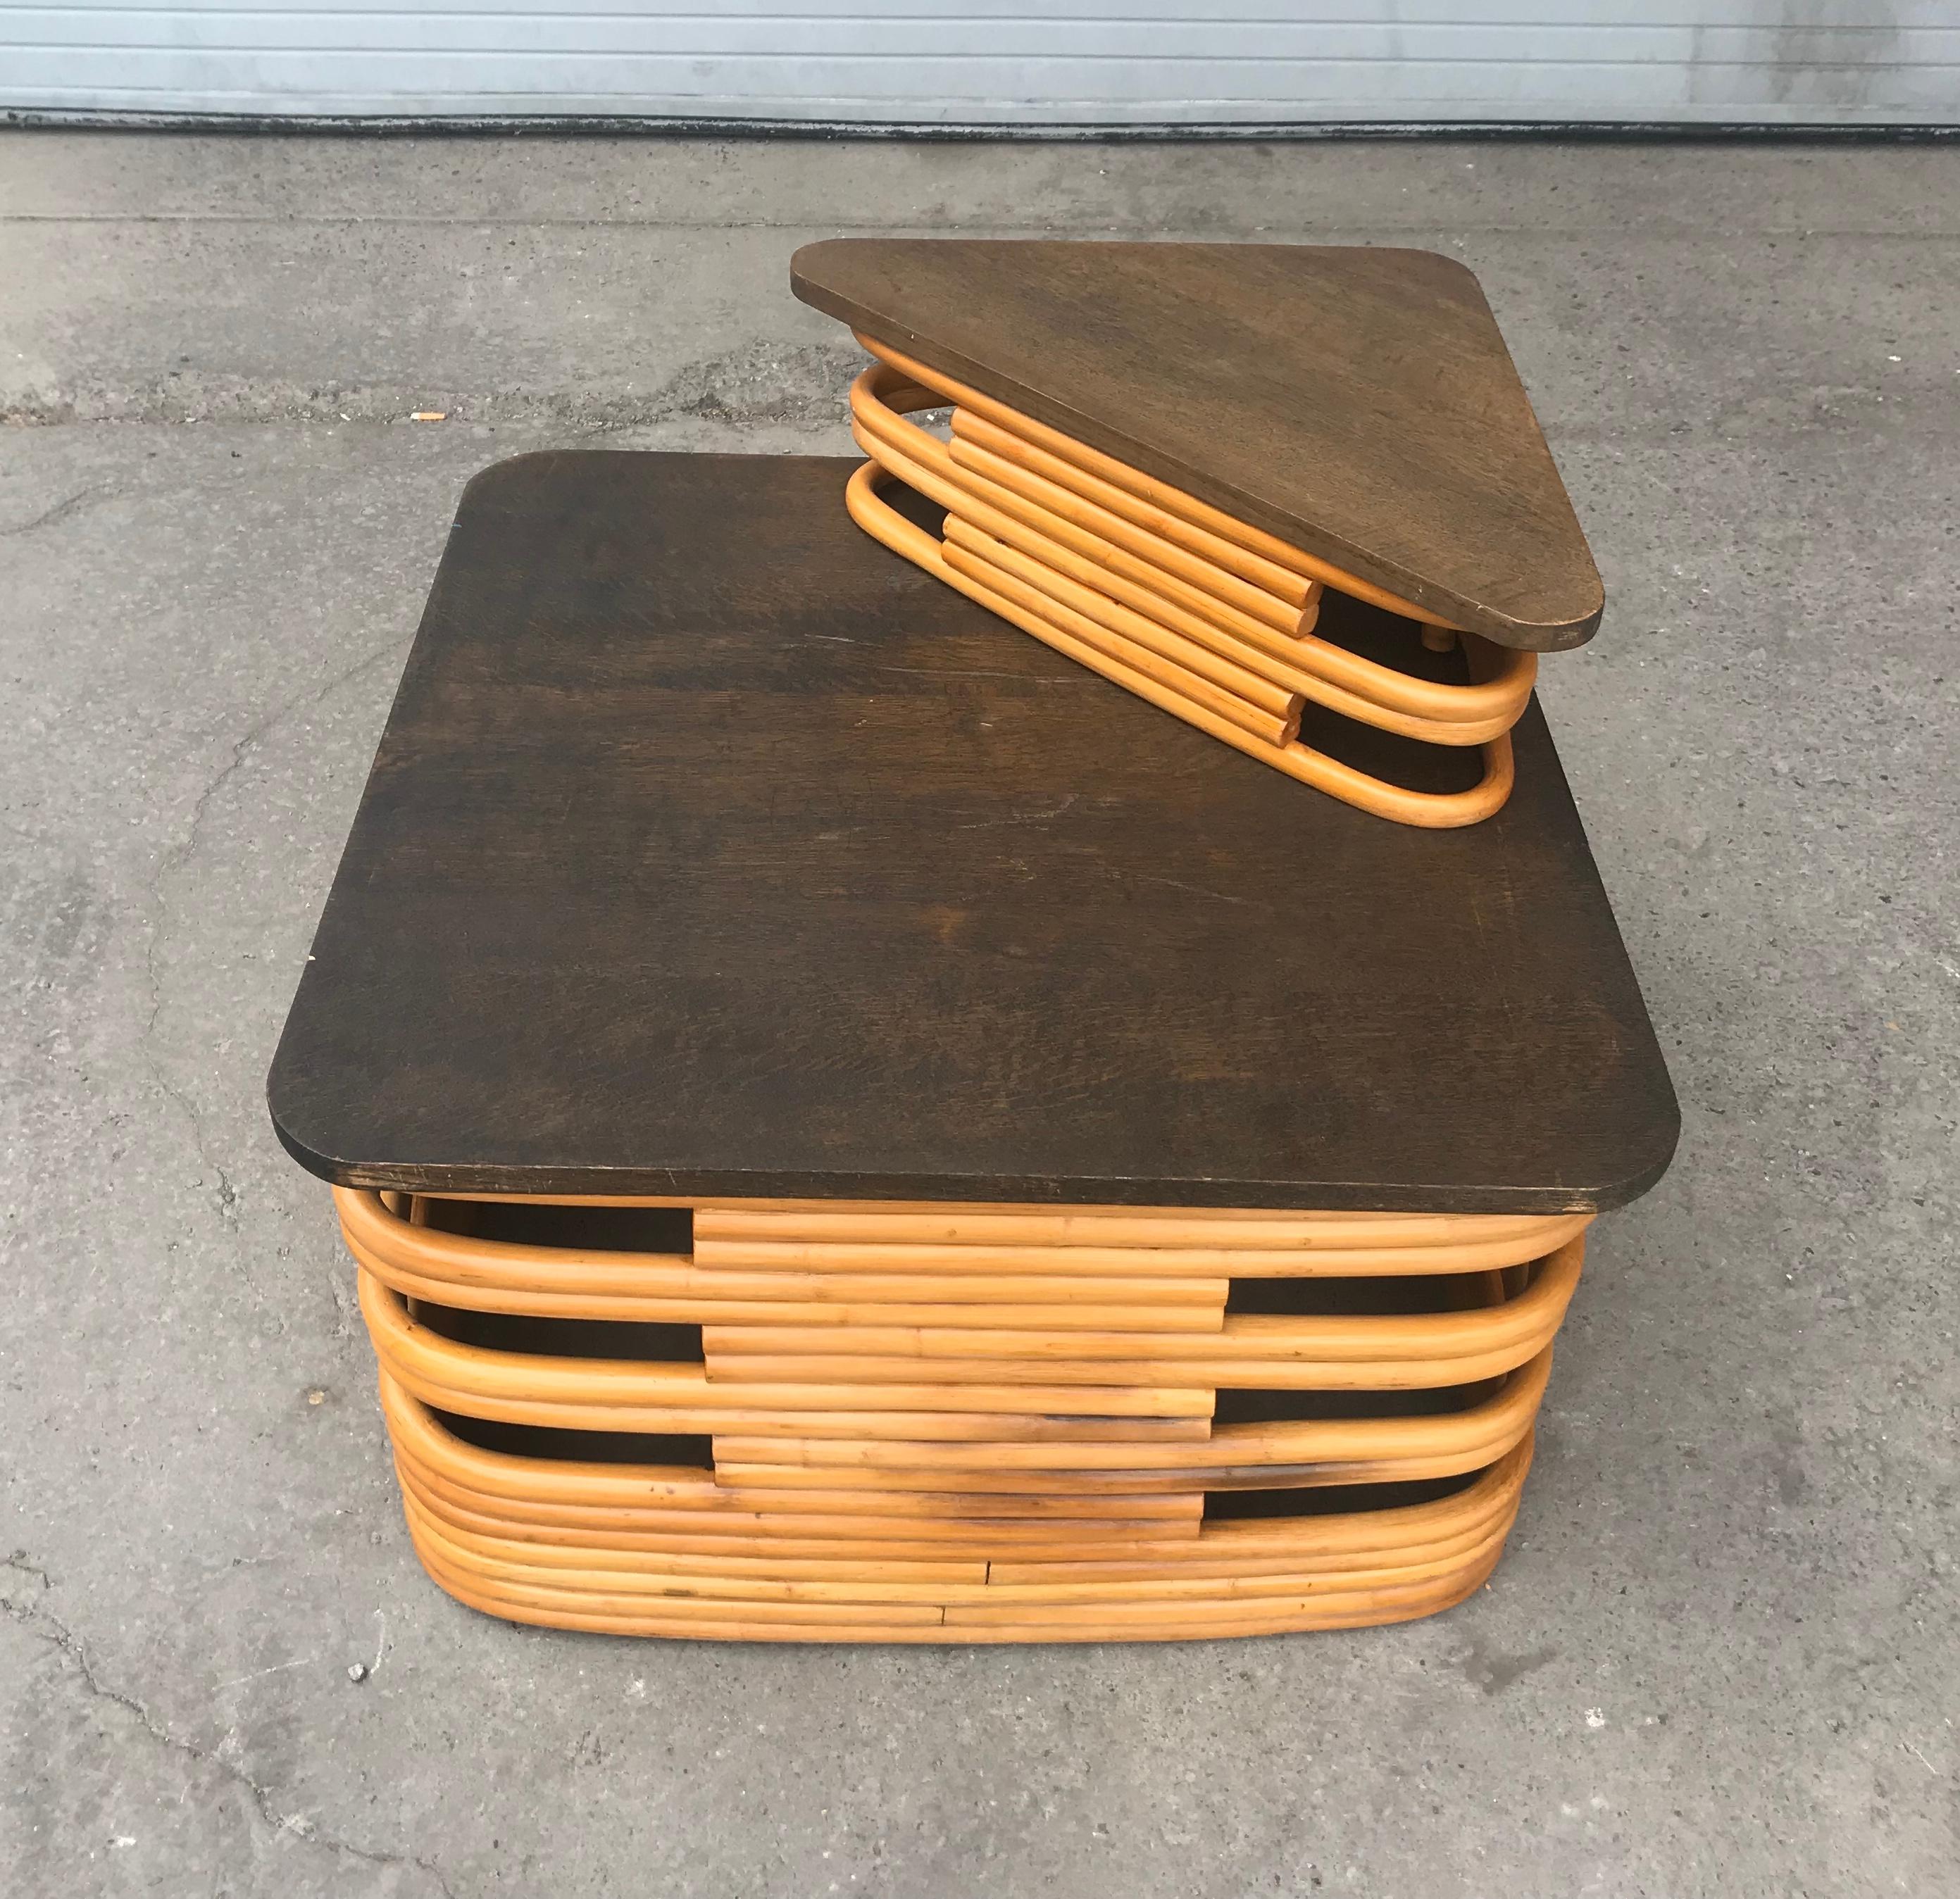 Classic 1940s Paul Frankl style Rattan/bamboo table. Pedestal. Art Deco style, amazing quality and construction, tops have been restored. Hand delivery avail to New York City or anywhere en route from Buffalo NY.